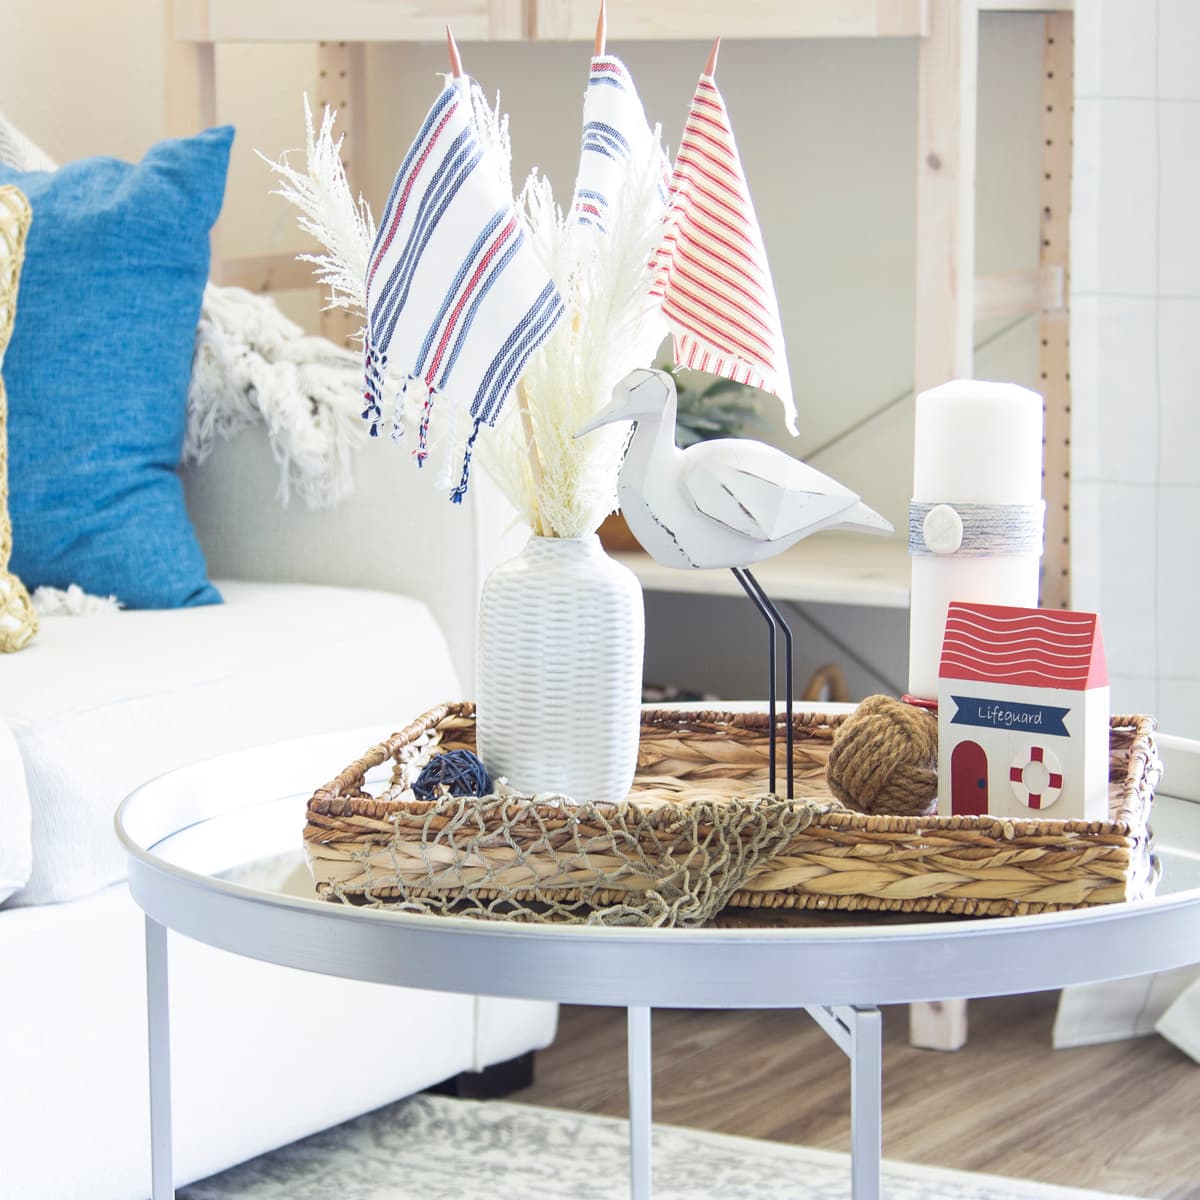 Adding Red White Blue to a Summer Vignette